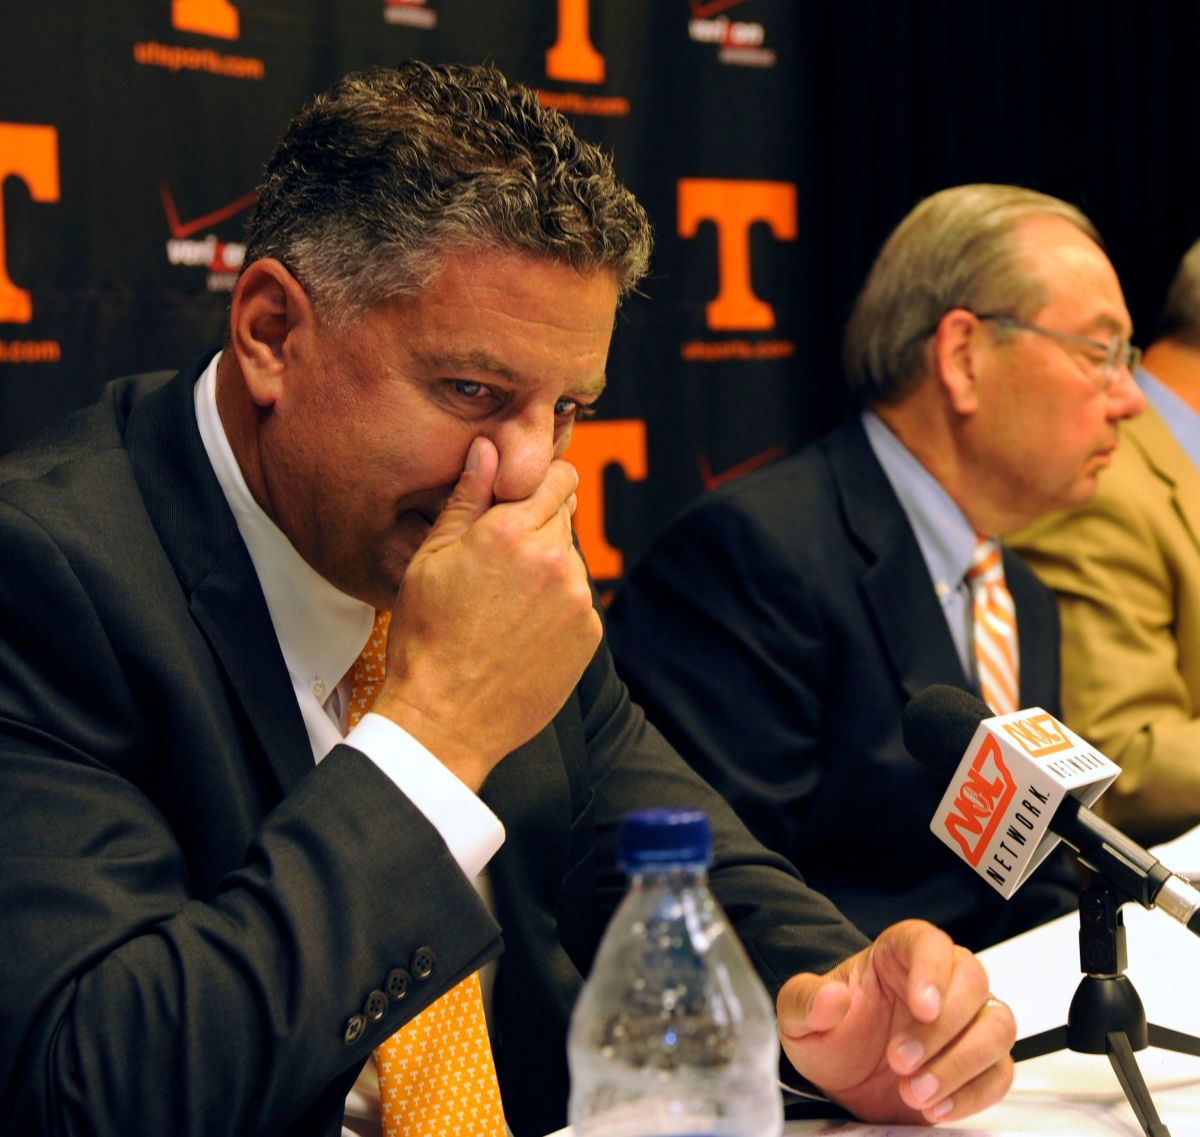 University of Tennessee head men s basketball coach Bruce Pearl expresses remorse for giving misleading information to the NCAA during an investigation in June of this year. The press conference on Friday, Sep. 10, 2010 revealed that Pearl's compensation will be reduced by $1.5 million over the next five years.